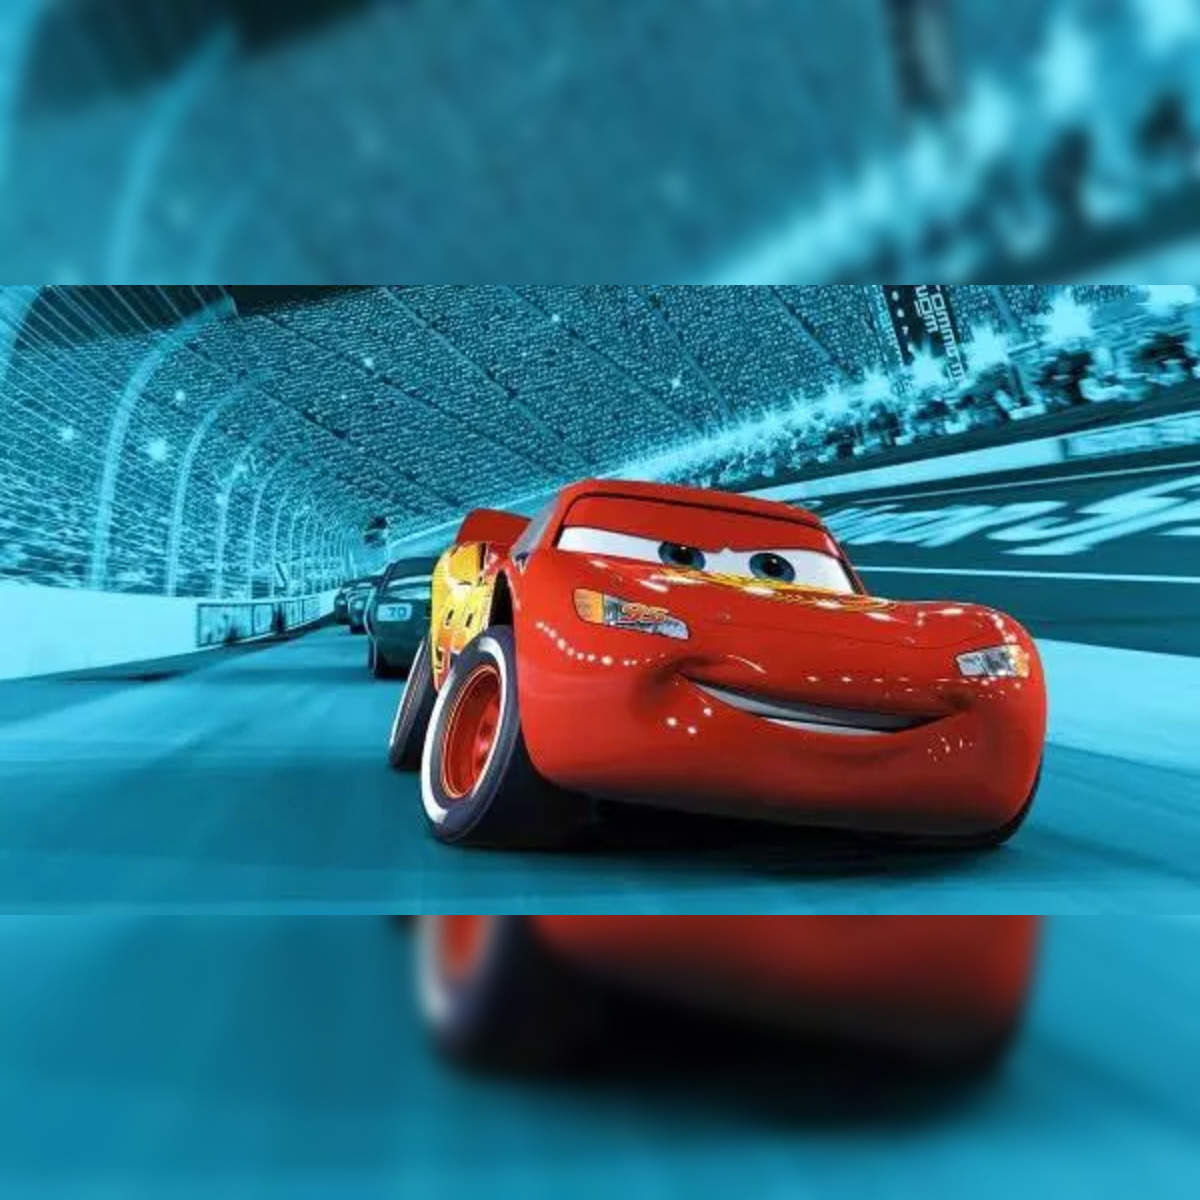 cars 4 spinoff: The potential Cars 4 Spinoff – Here's what we know - The  Economic Times